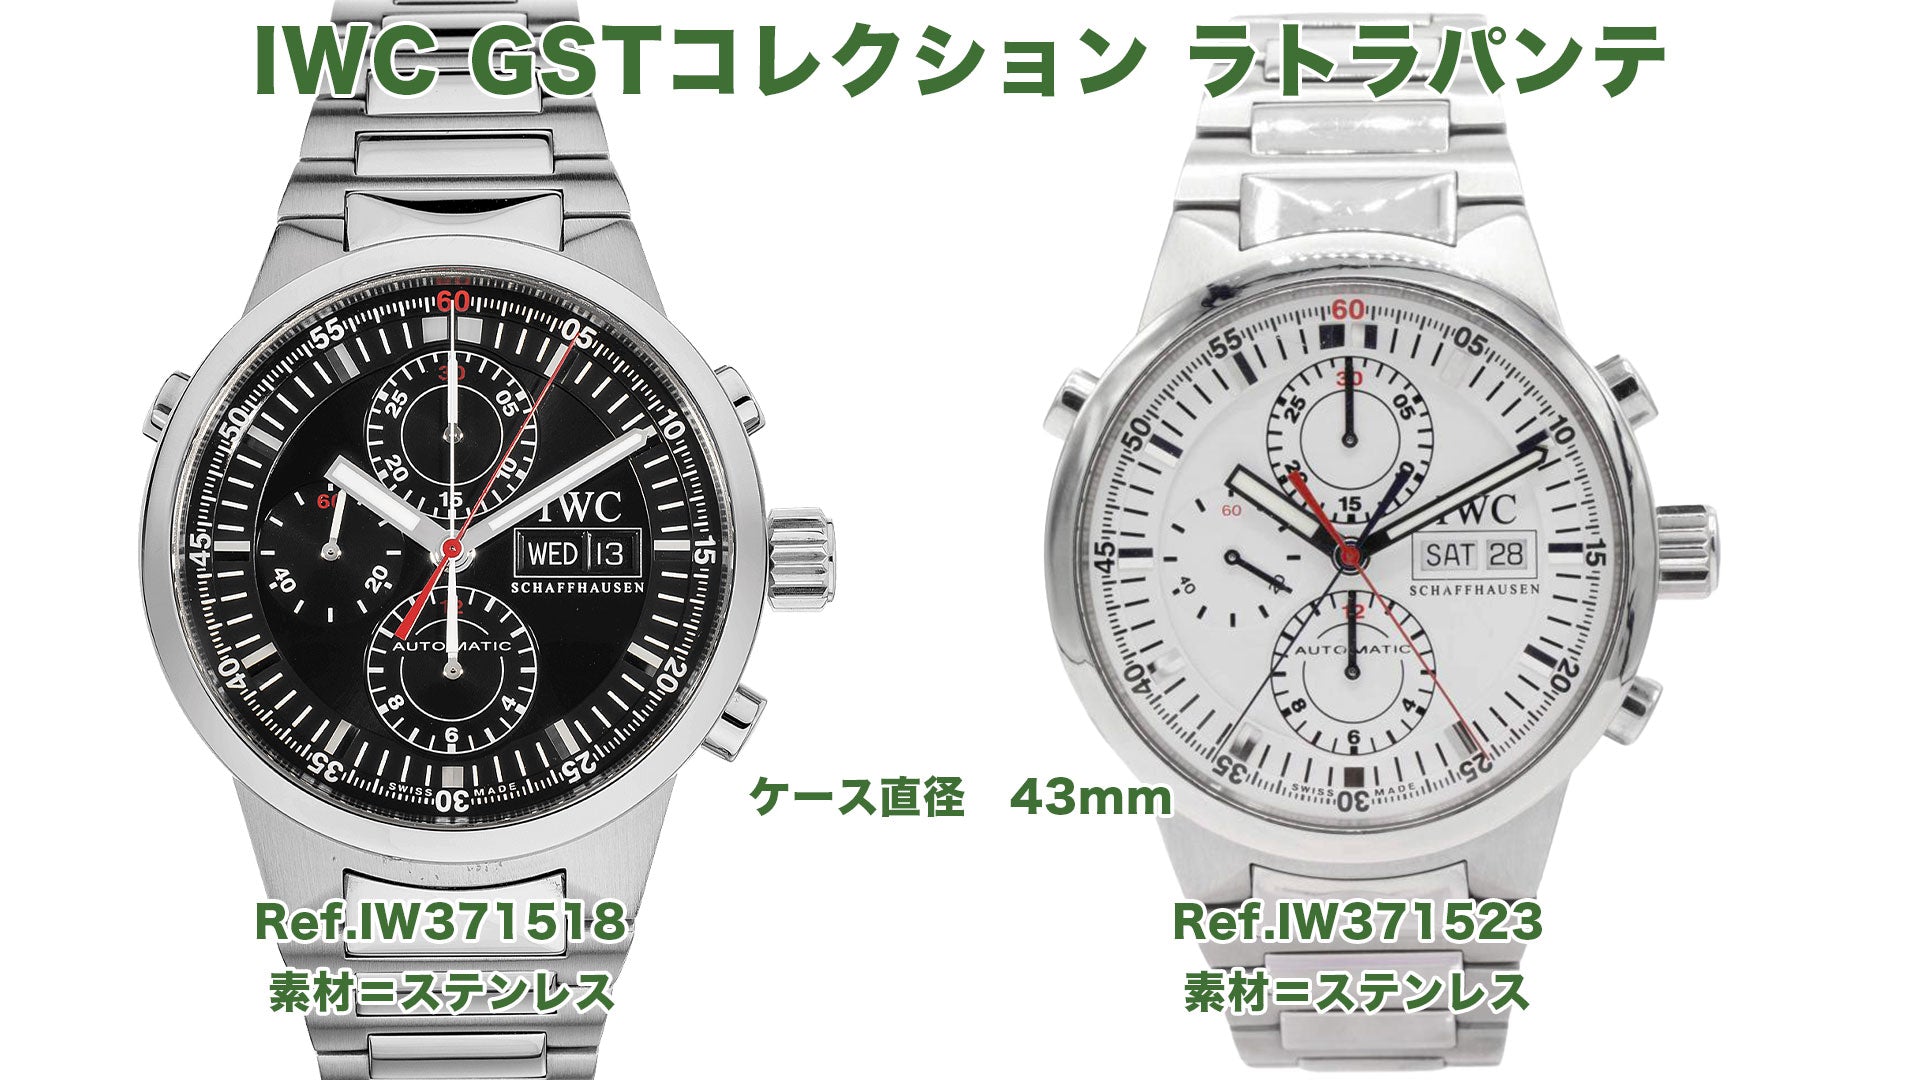 IWC GST Collection Rattrapante Ref. IW371518 & IW371523